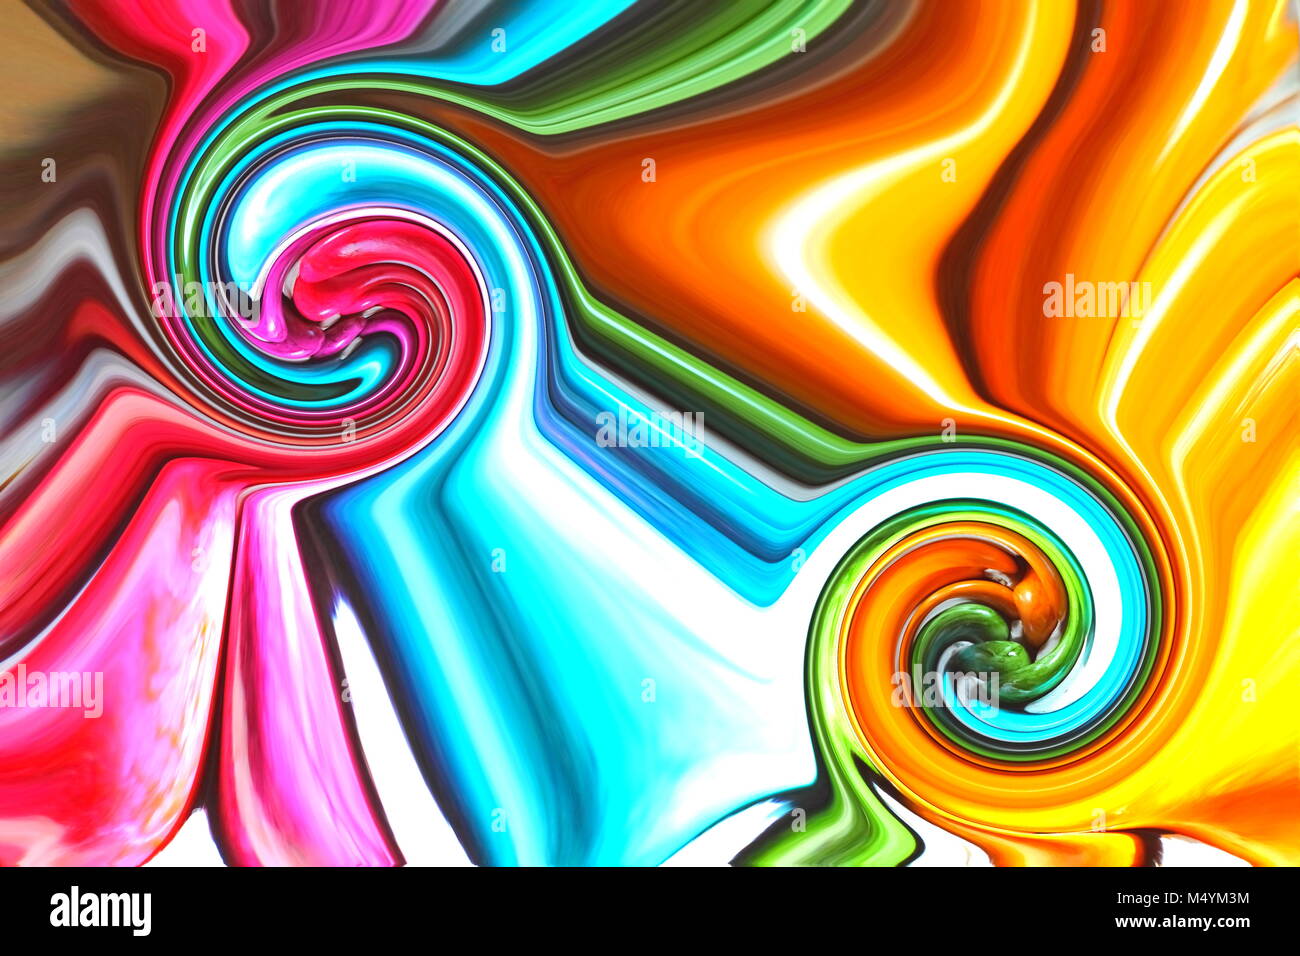 Fancy swirls and waves. Distorted photo image. Mixed paint colors. Stock Photo